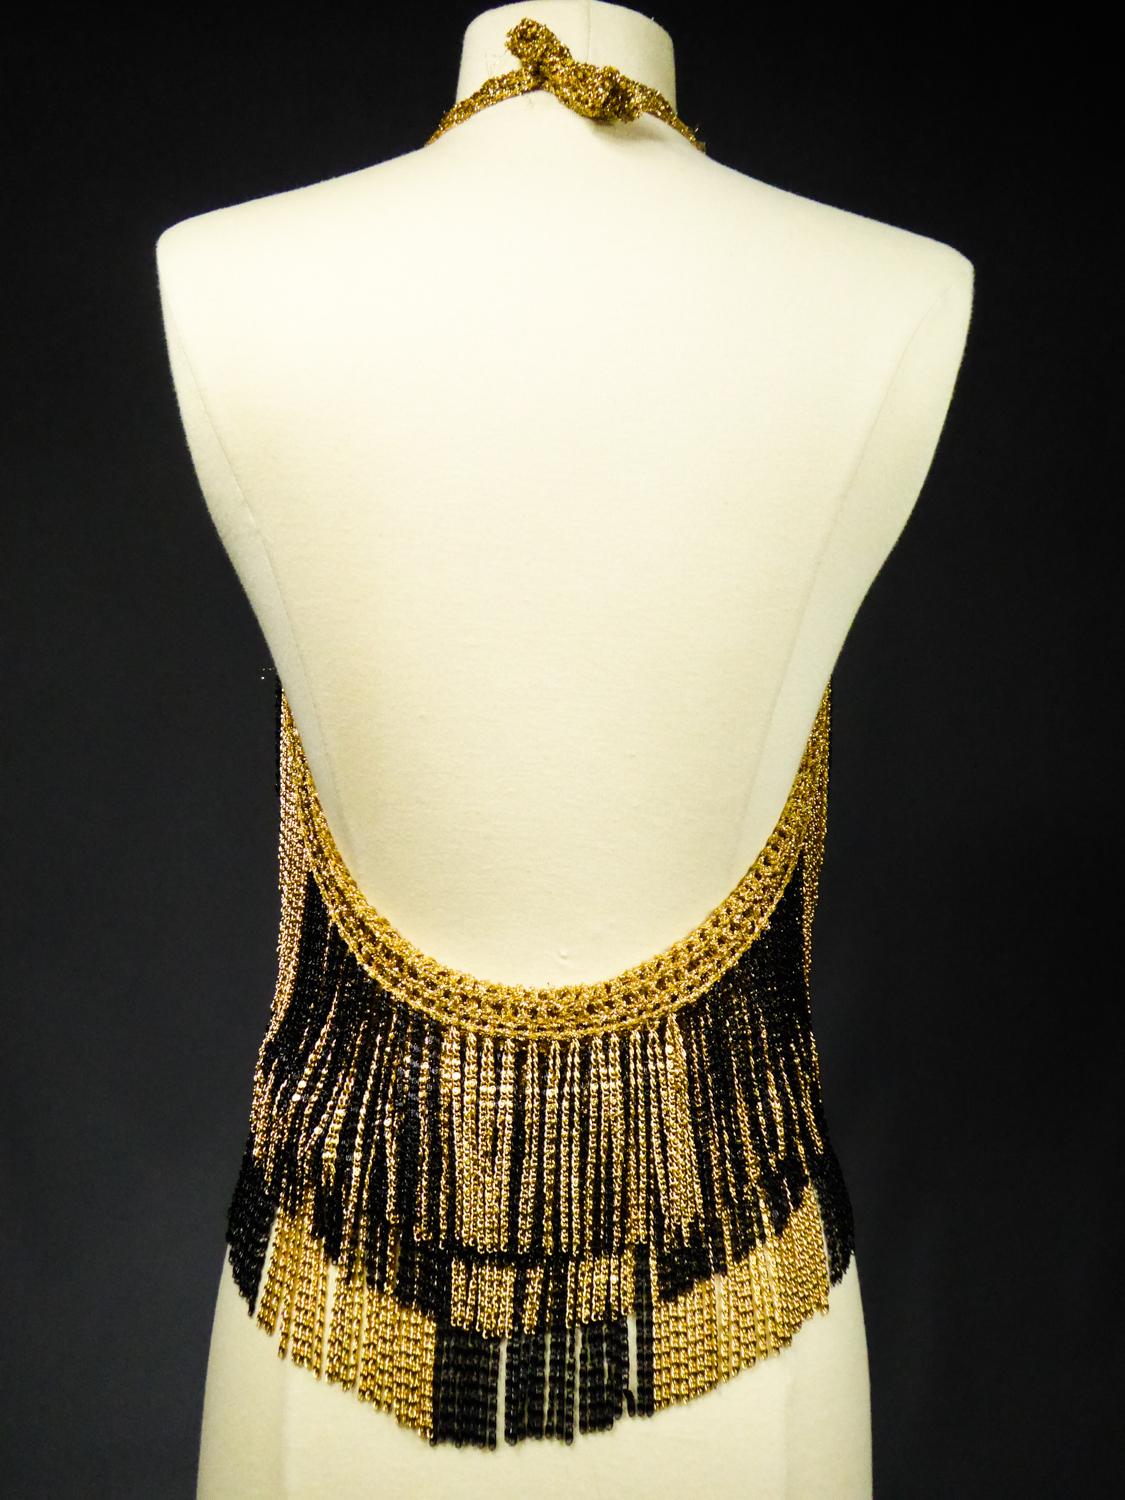 A Loris Azzaro French Couture Top in Lurex Circa 1970 For Sale 5